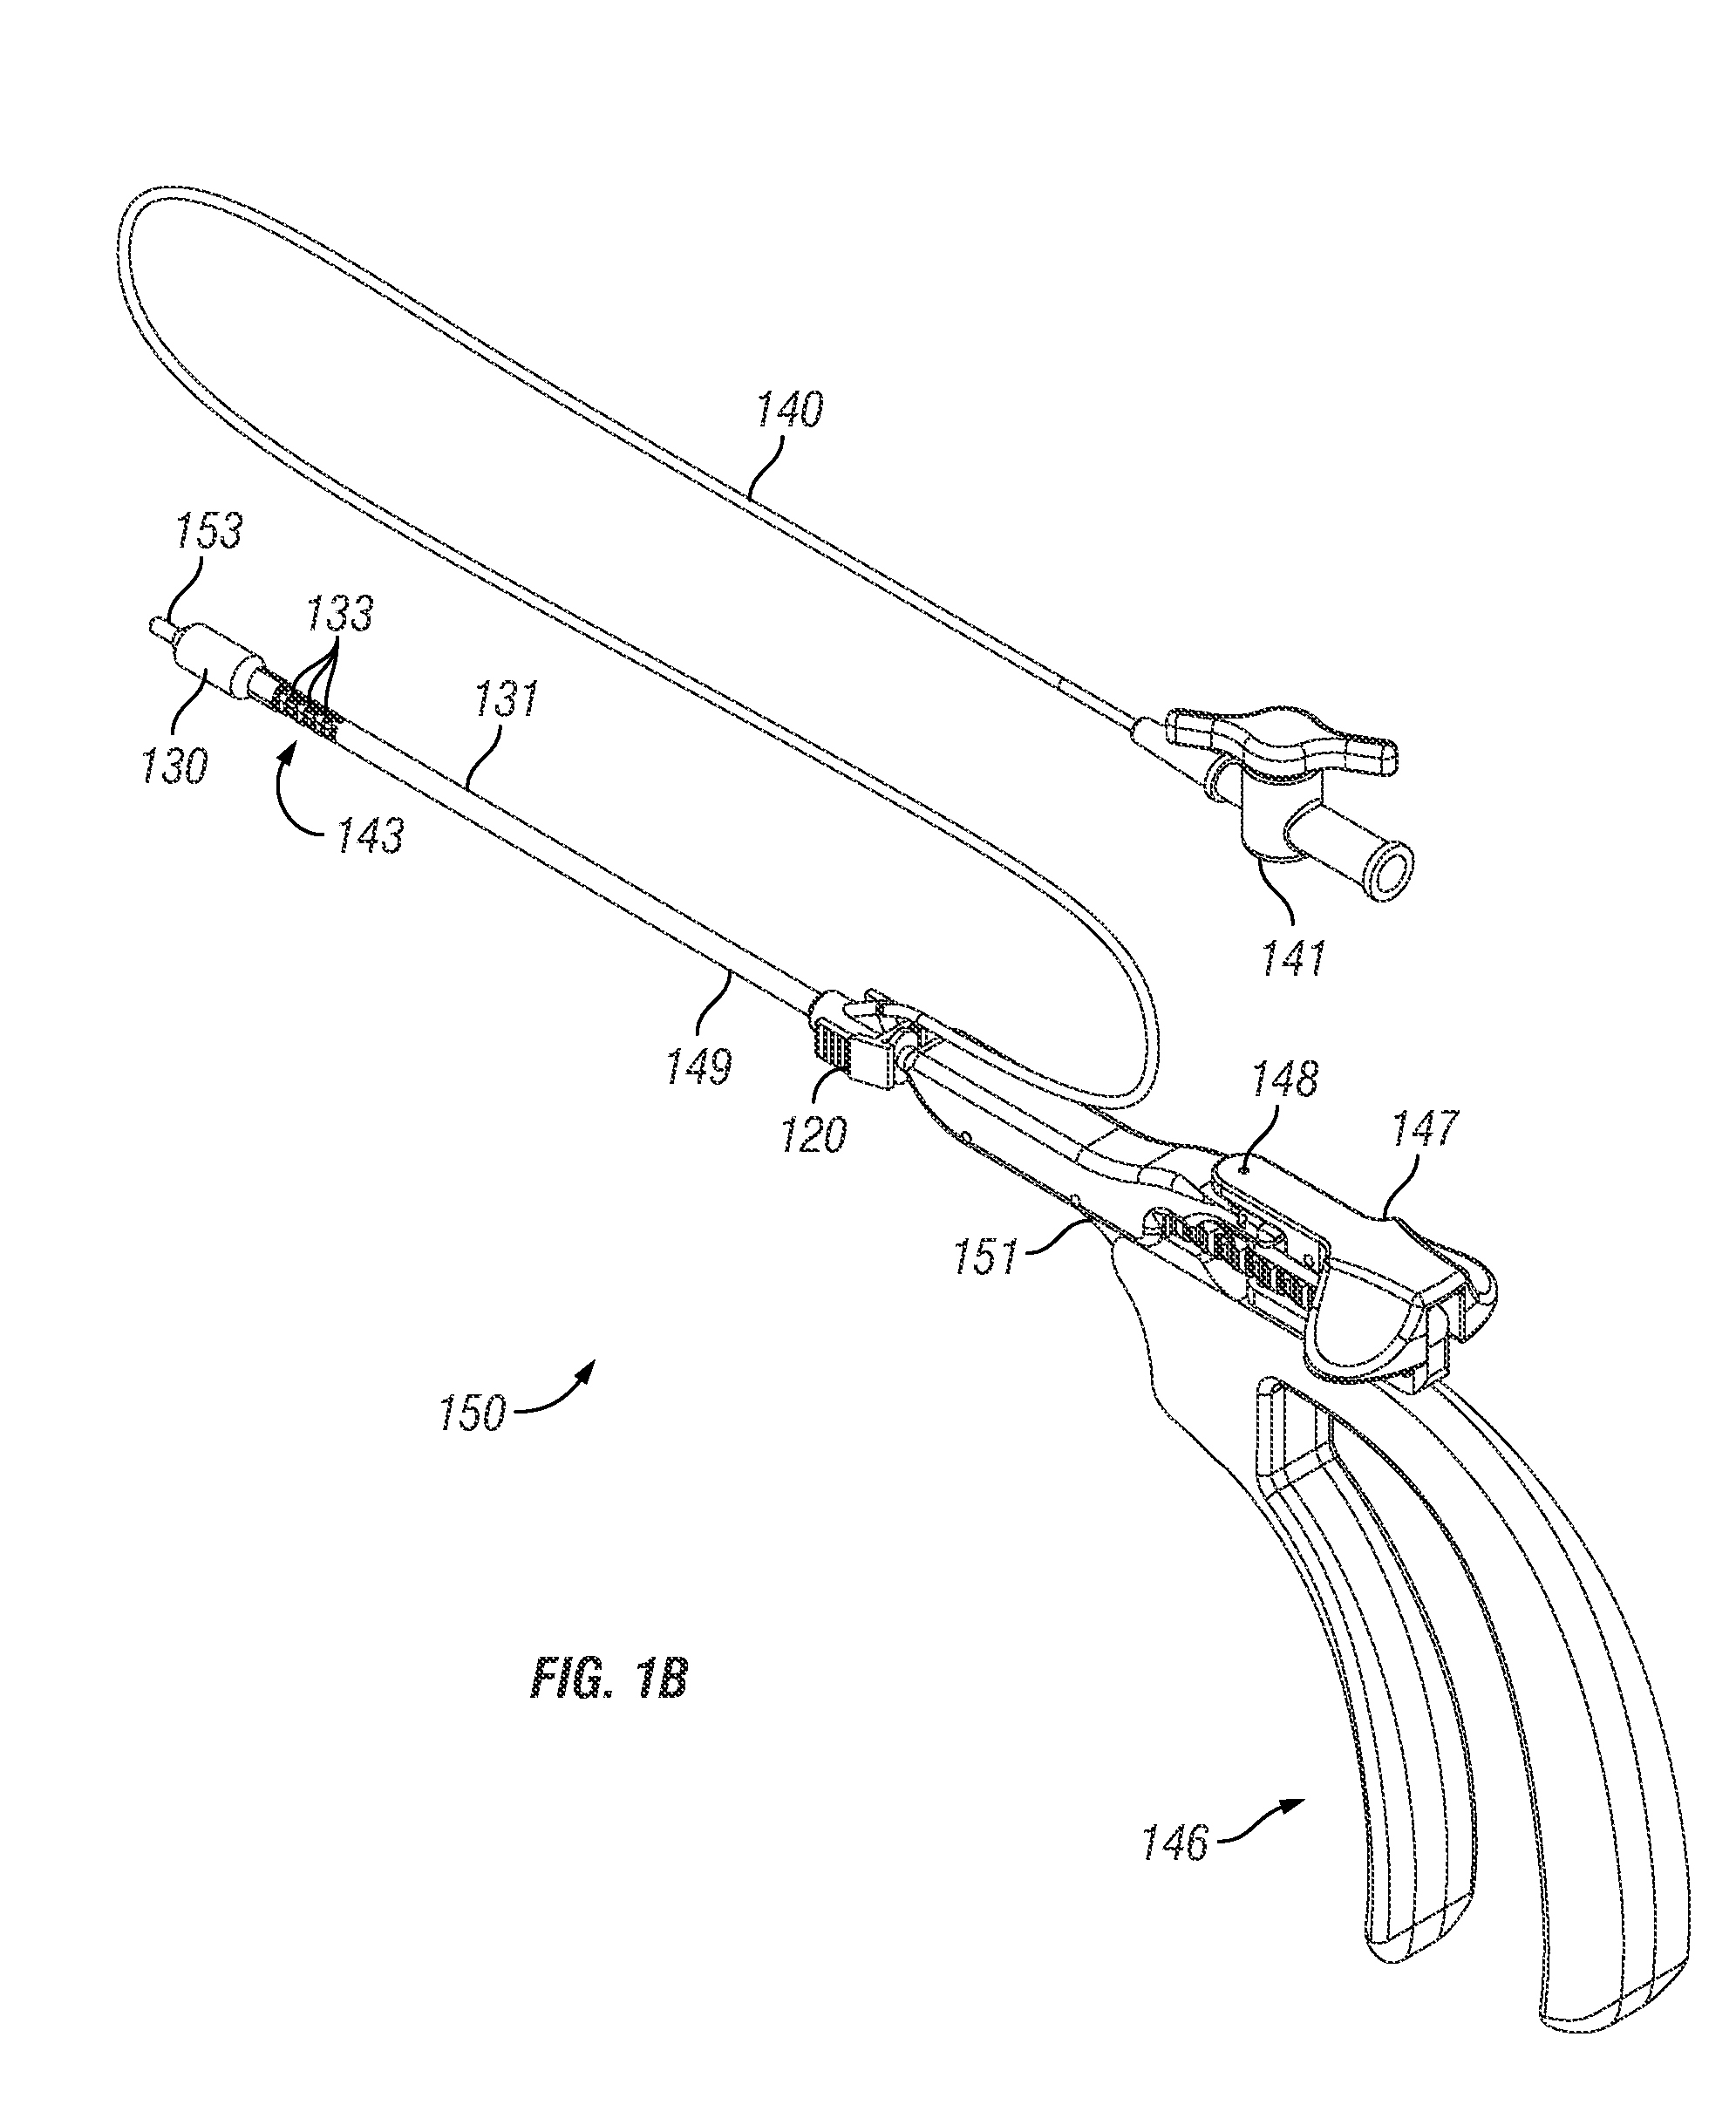 Systems, devices and methods for providing therapy to an anatomical structure